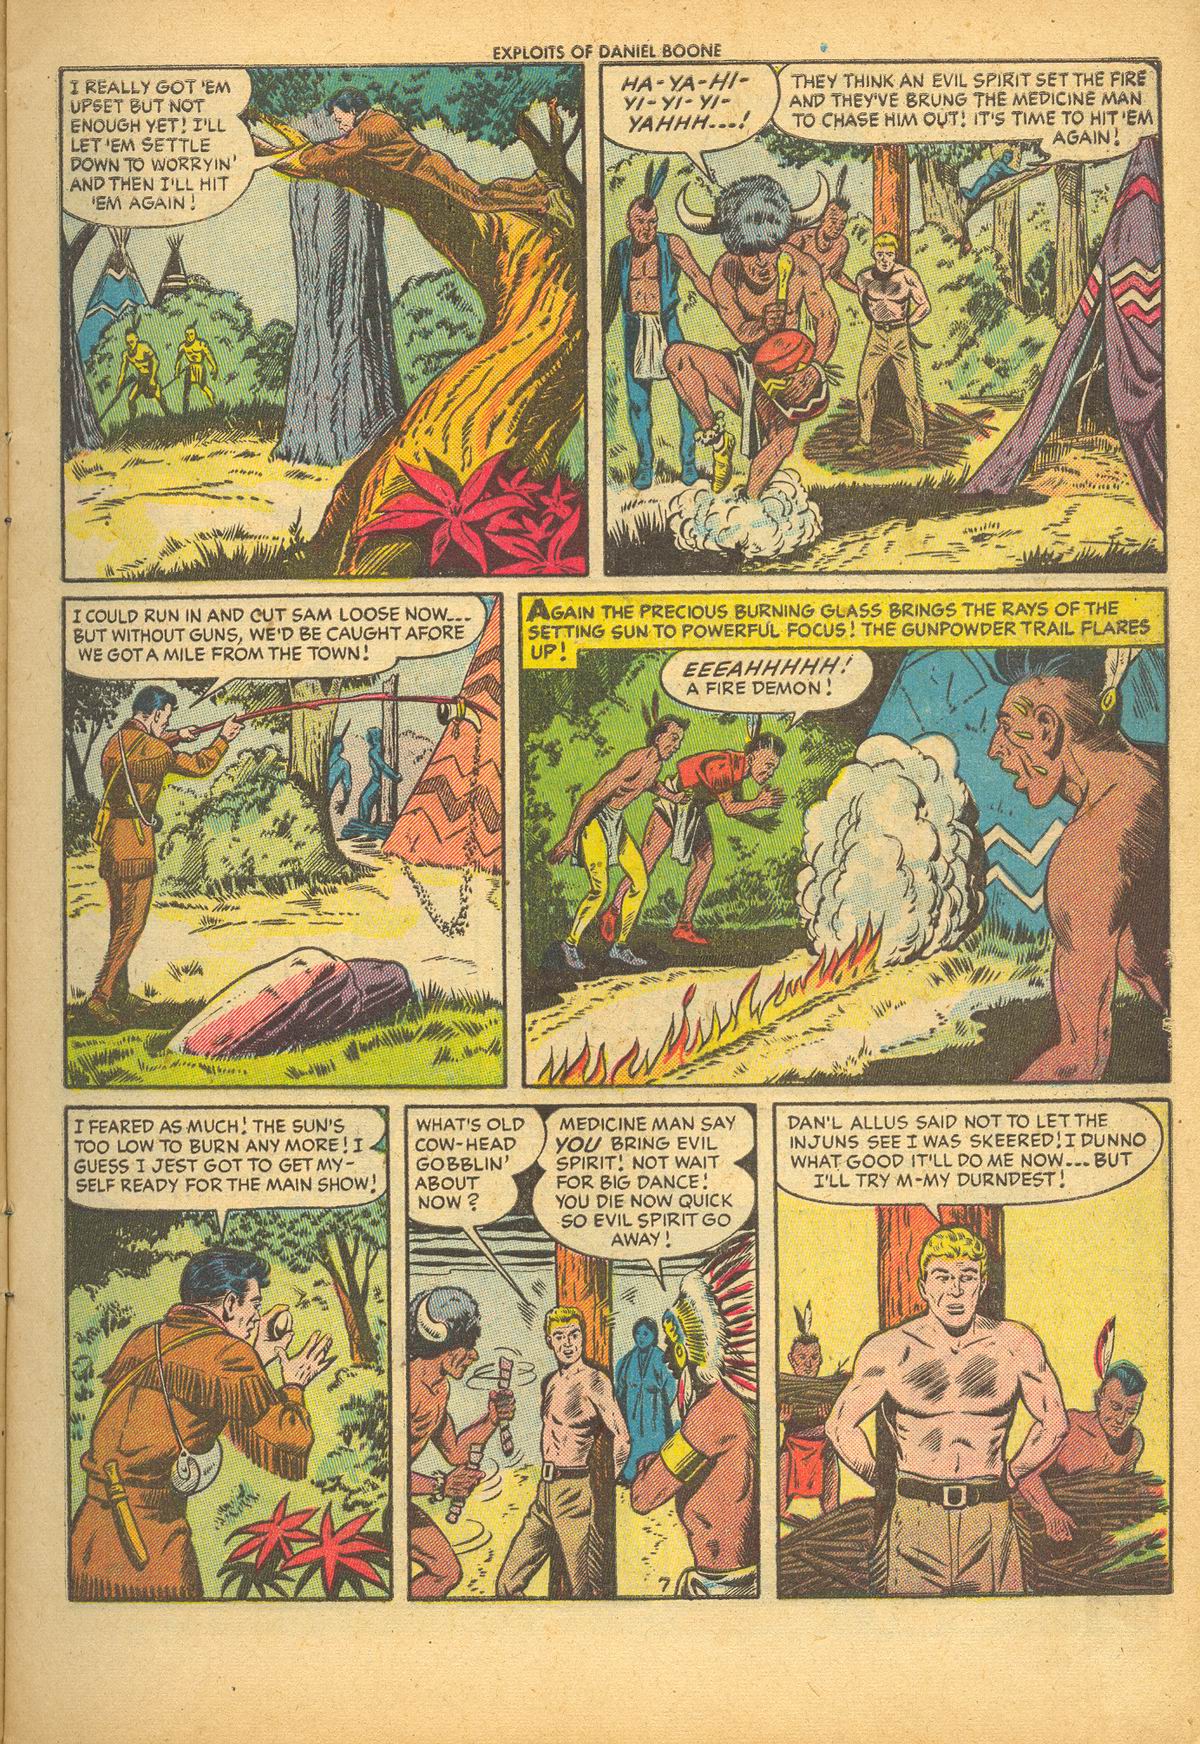 Read online Exploits of Daniel Boone comic -  Issue #2 - 9